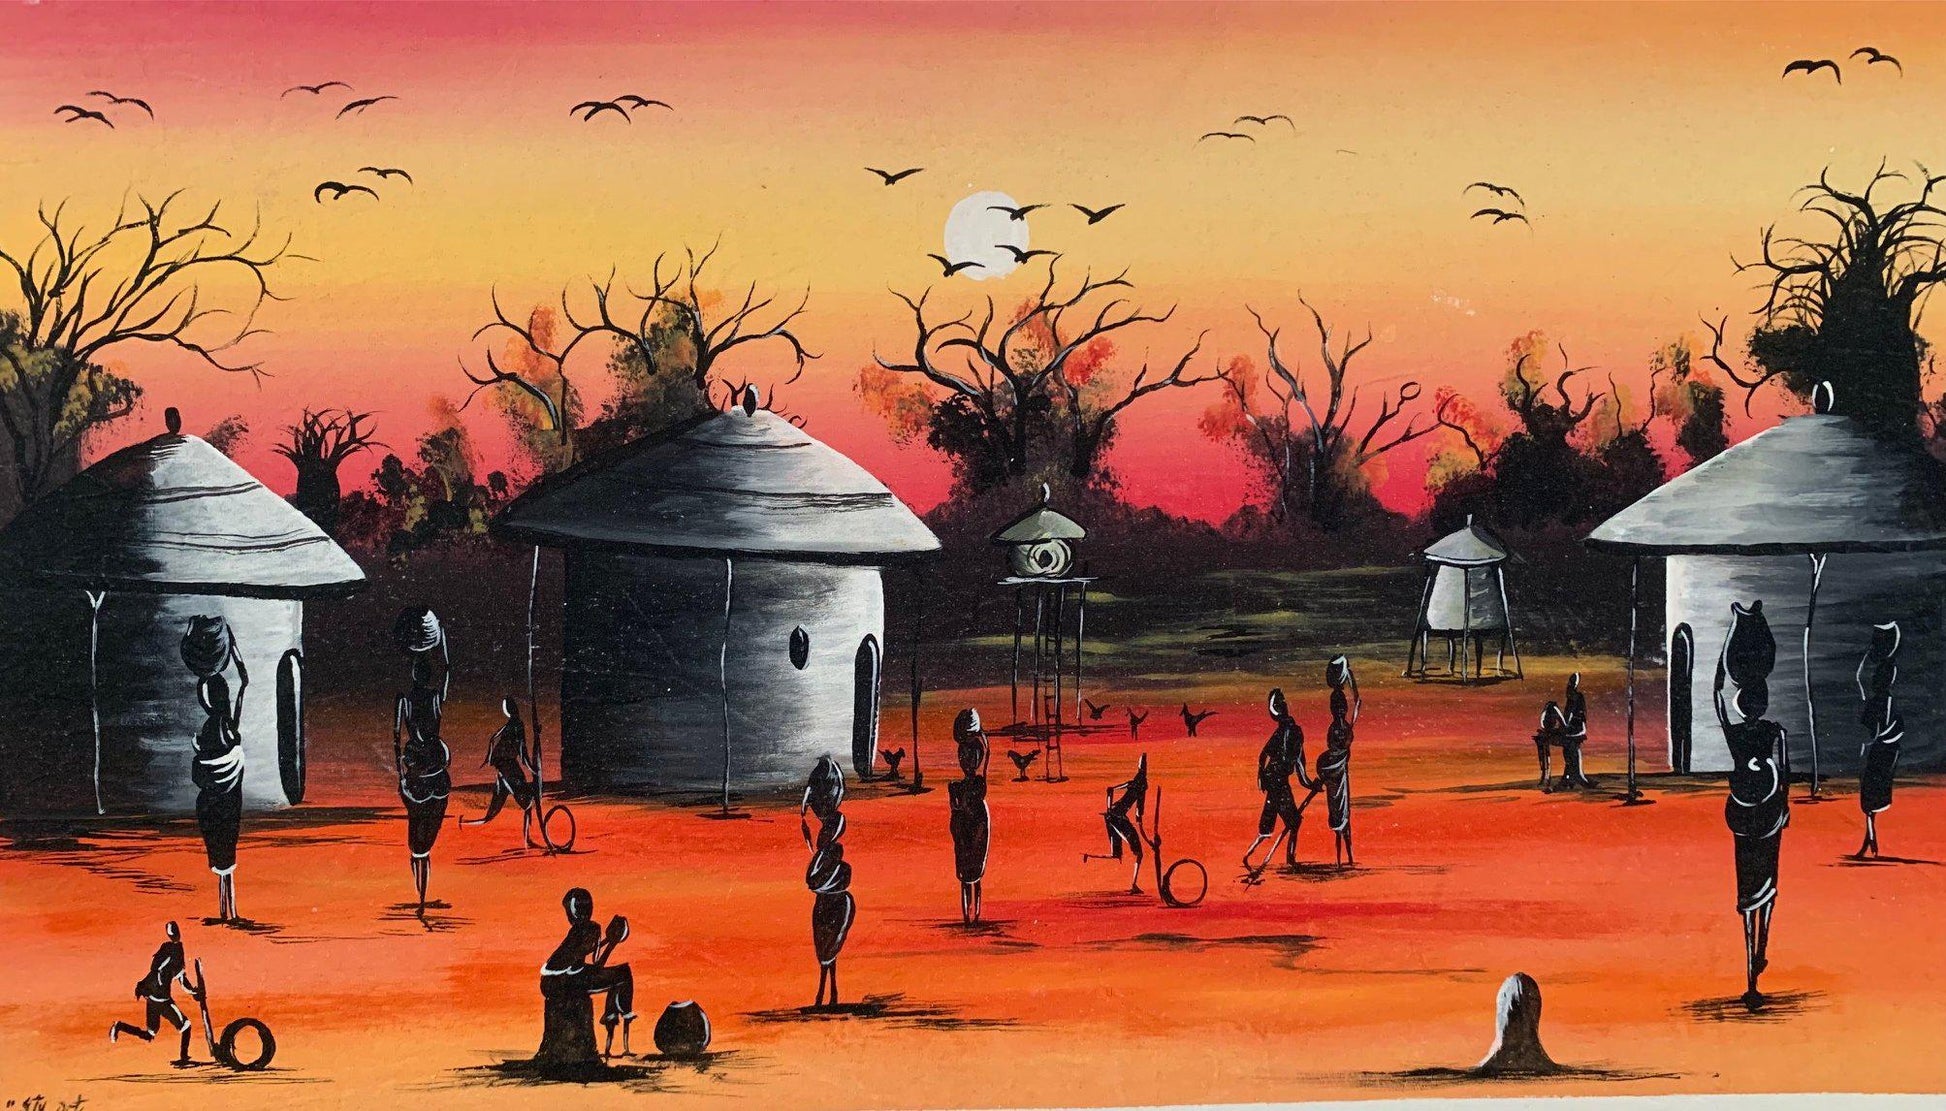 Original Oil Painting And Wall Art From Africa Titled 'Village At Suns –  BAOBAB LOST